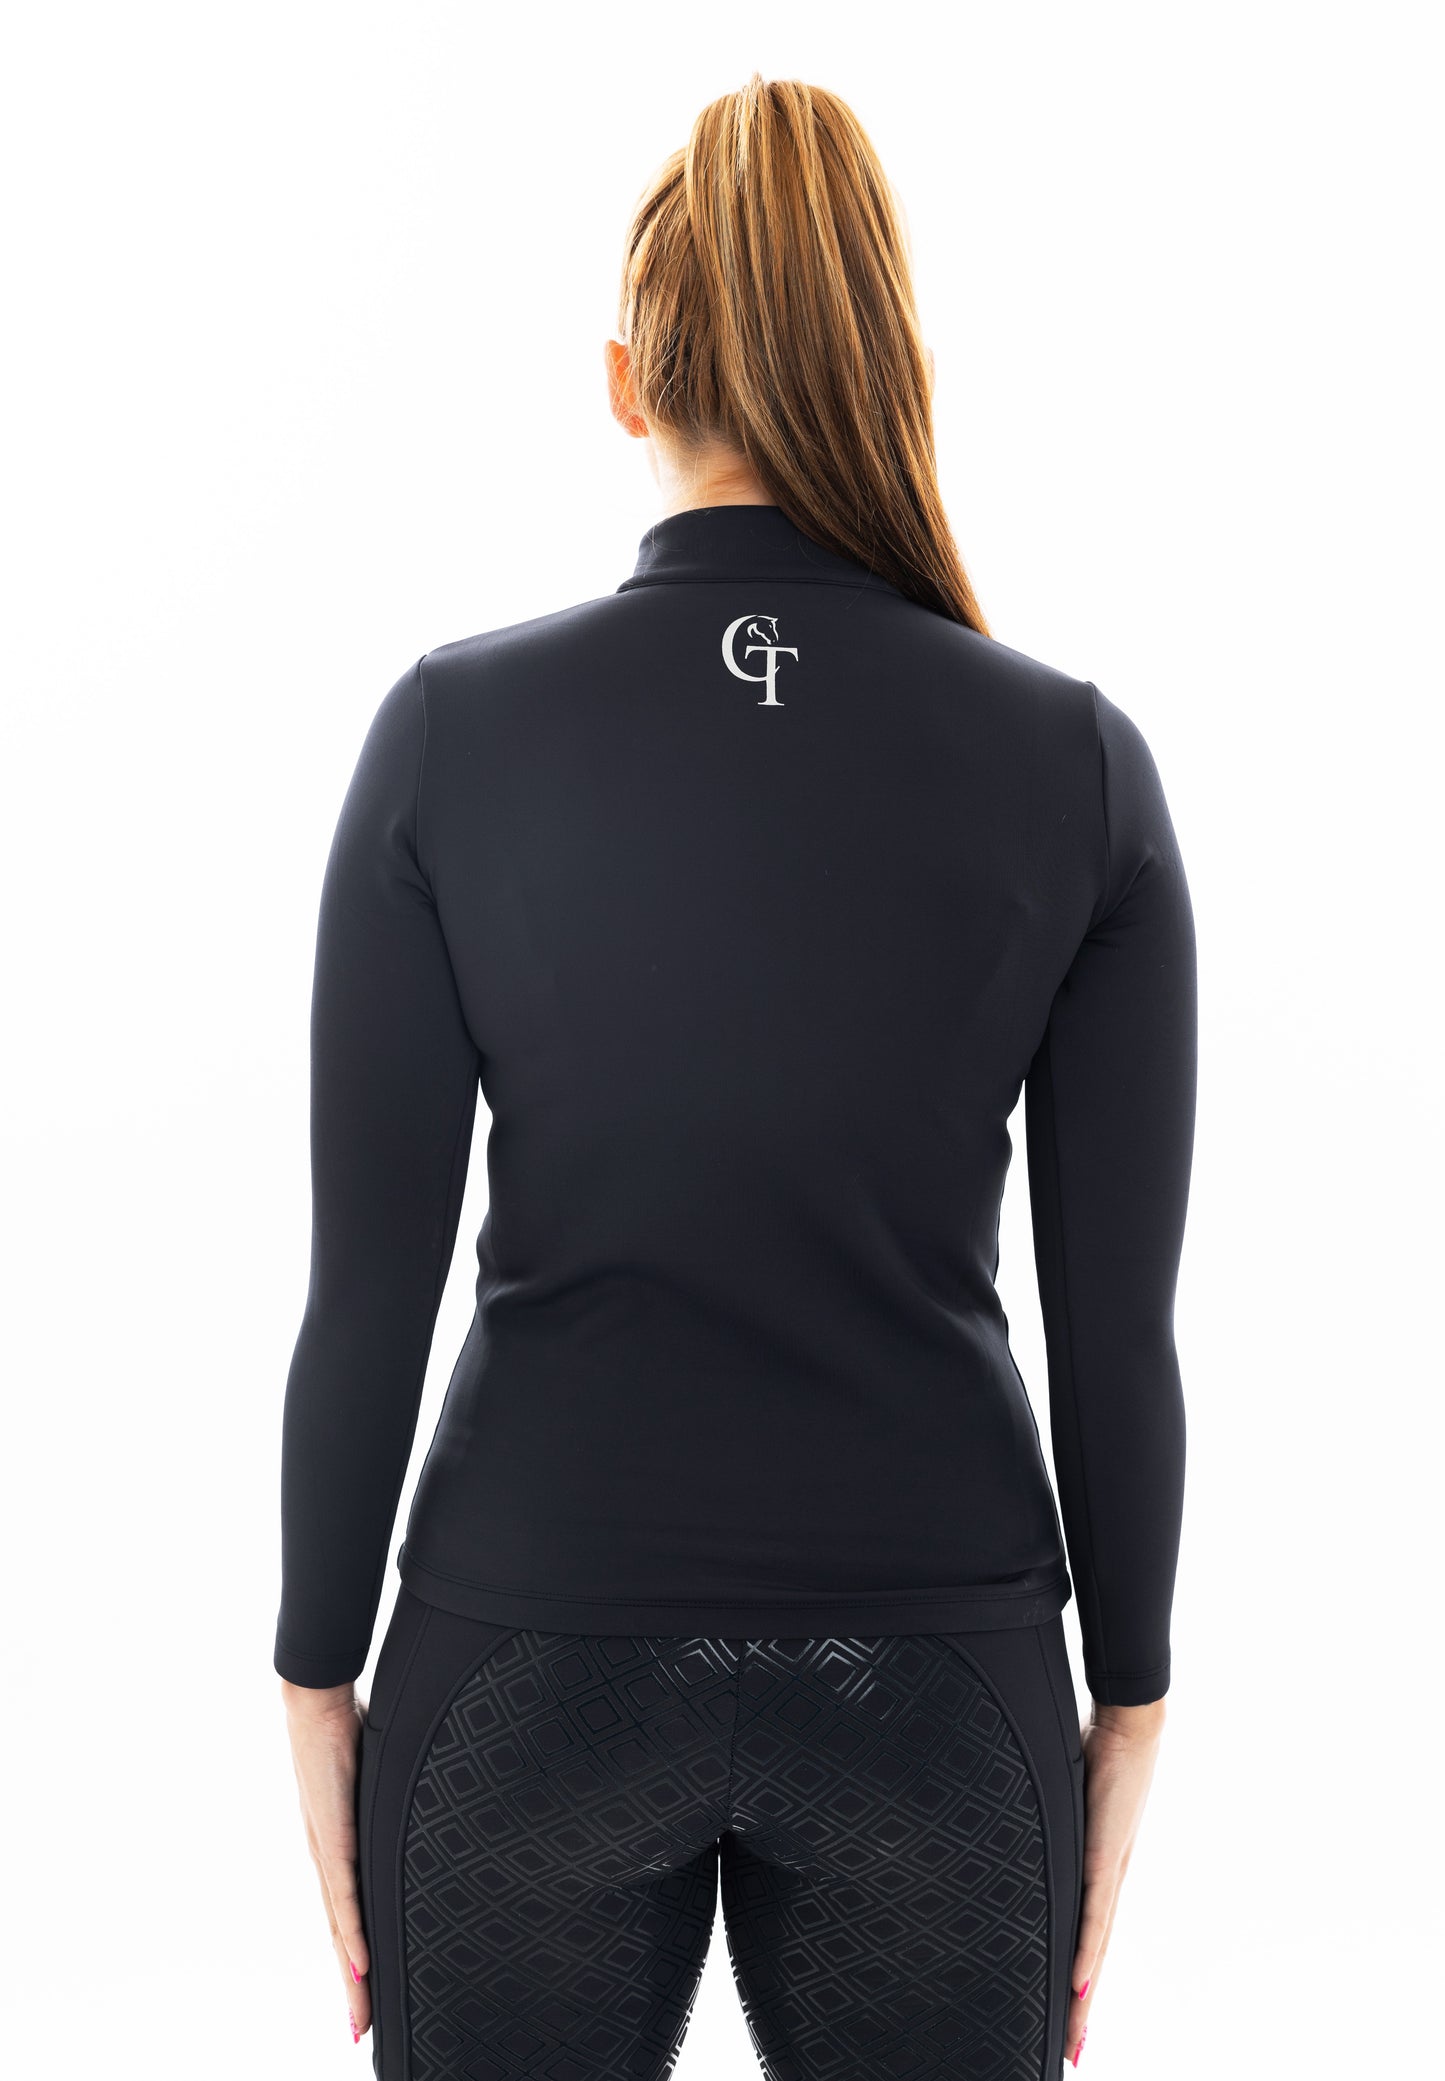 
                  
                    Young Rider / Horse Riding Base Layer Winter Fleece Lined- Black
                  
                